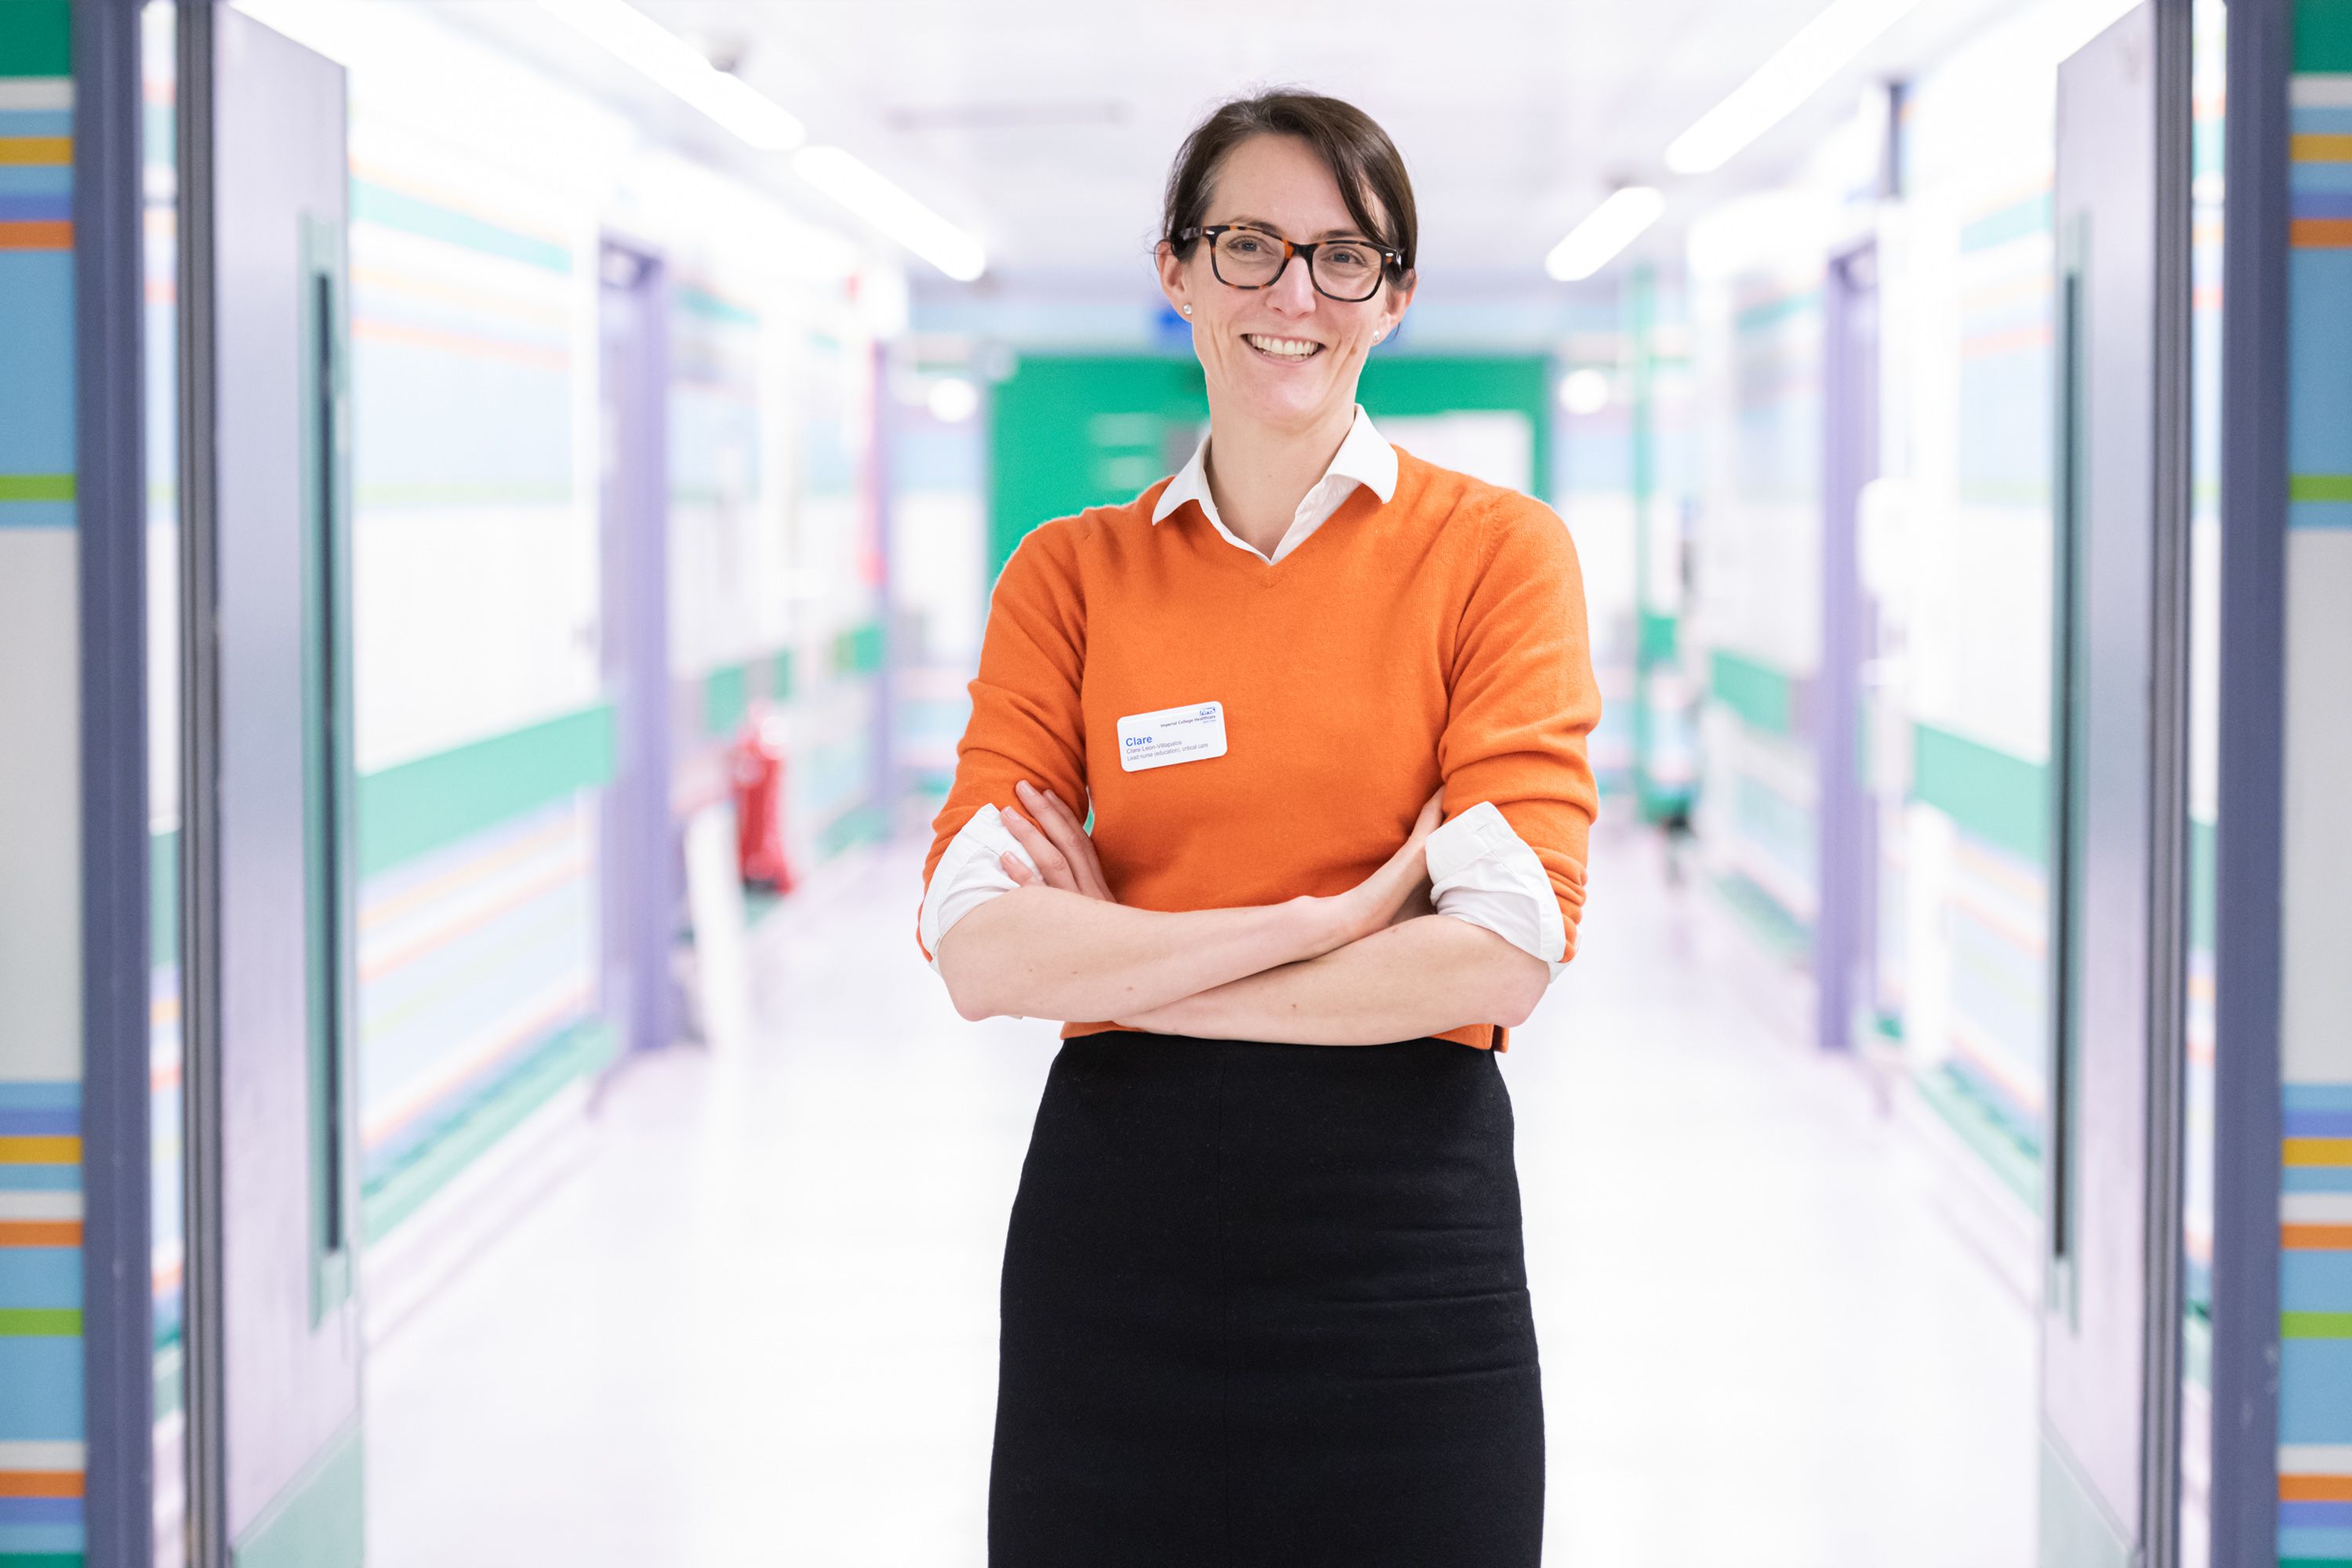 A portrait photograph of Clare Leon-Villapalos smiling as she stands in a white corridor